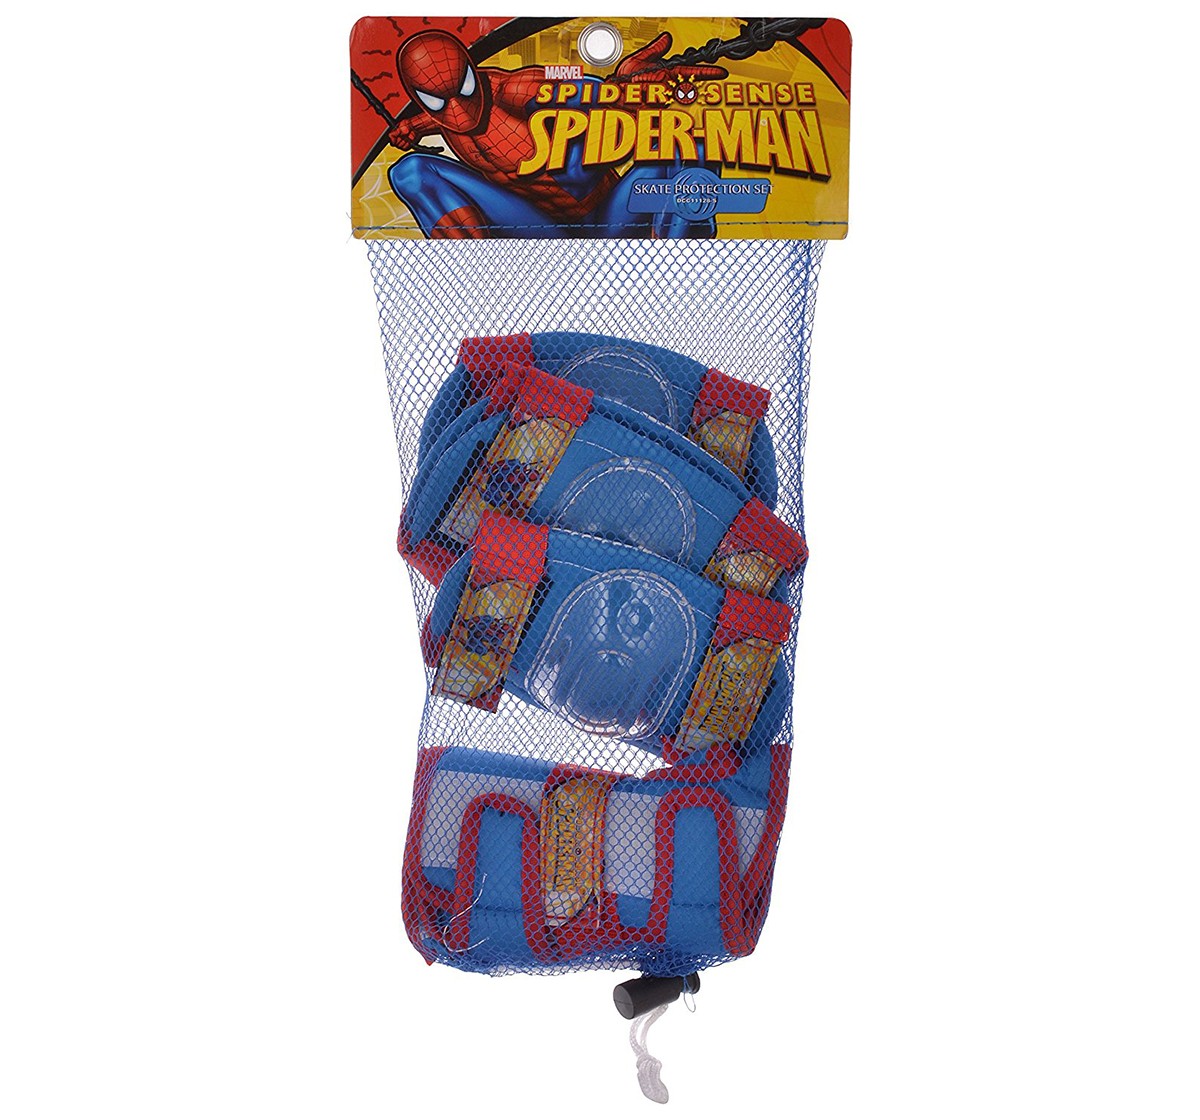 Marvel Disney Mesuca Spiderman Sports Protection - Set Of 6 Ball, Sports & Accessories for Kids age 5Y+ 